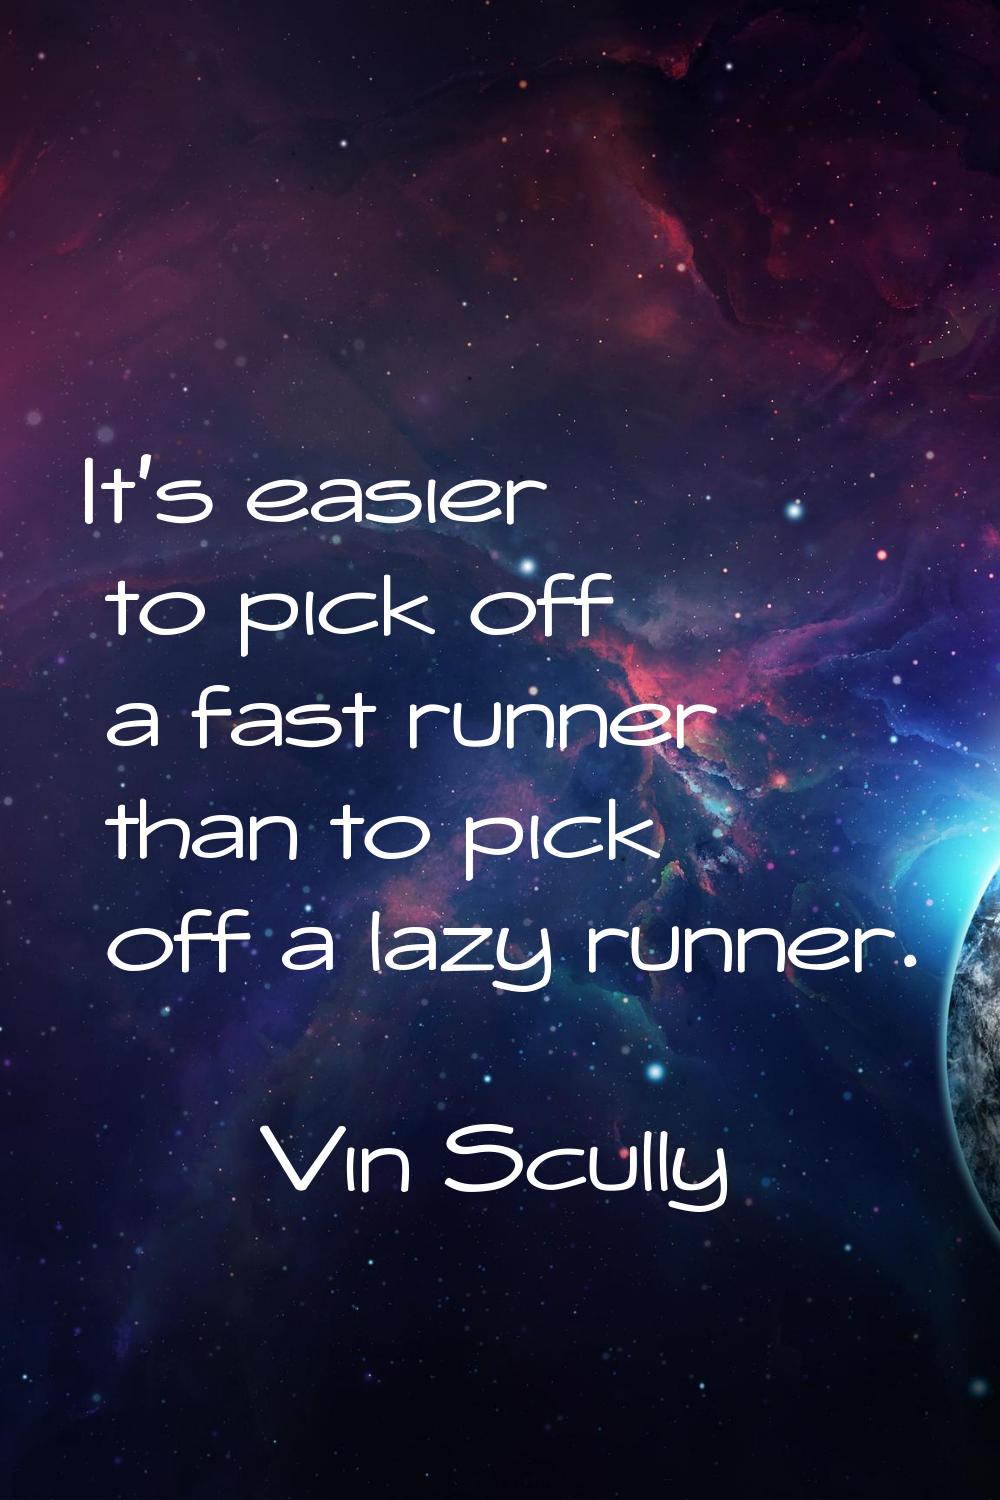 It's easier to pick off a fast runner than to pick off a lazy runner.